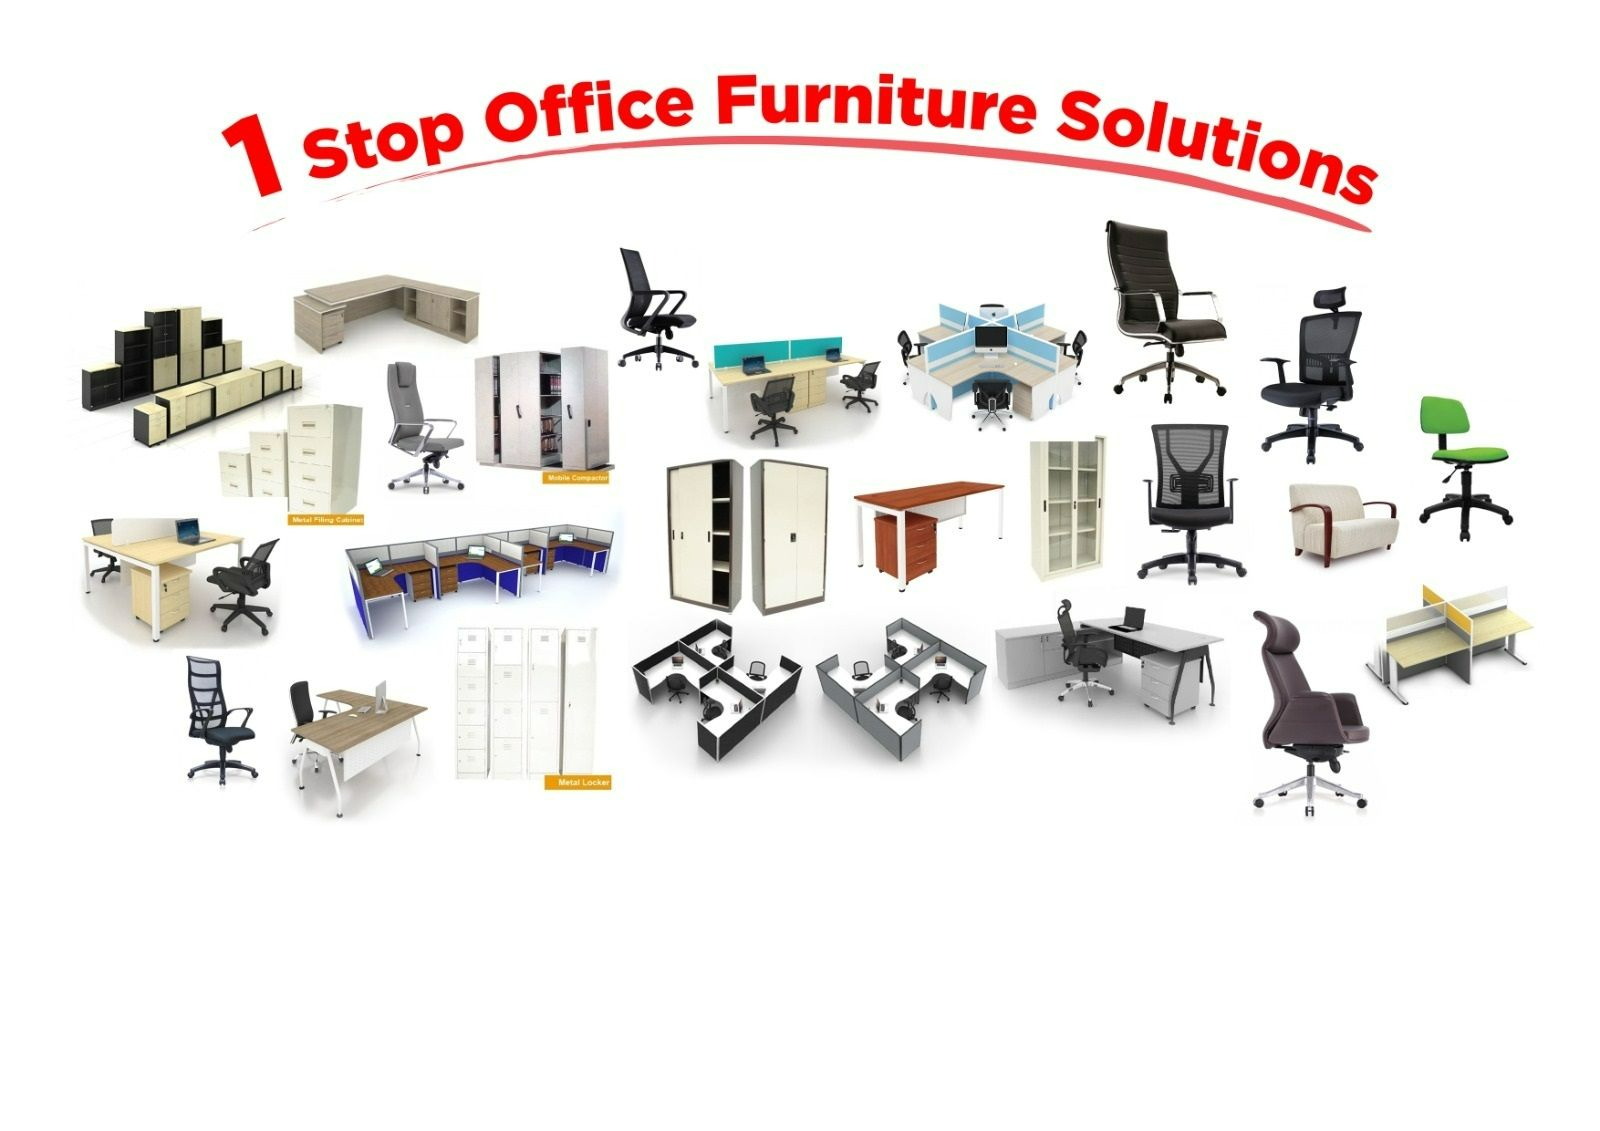 1 STOP OFFICE FURNITURE SOLUTIONS